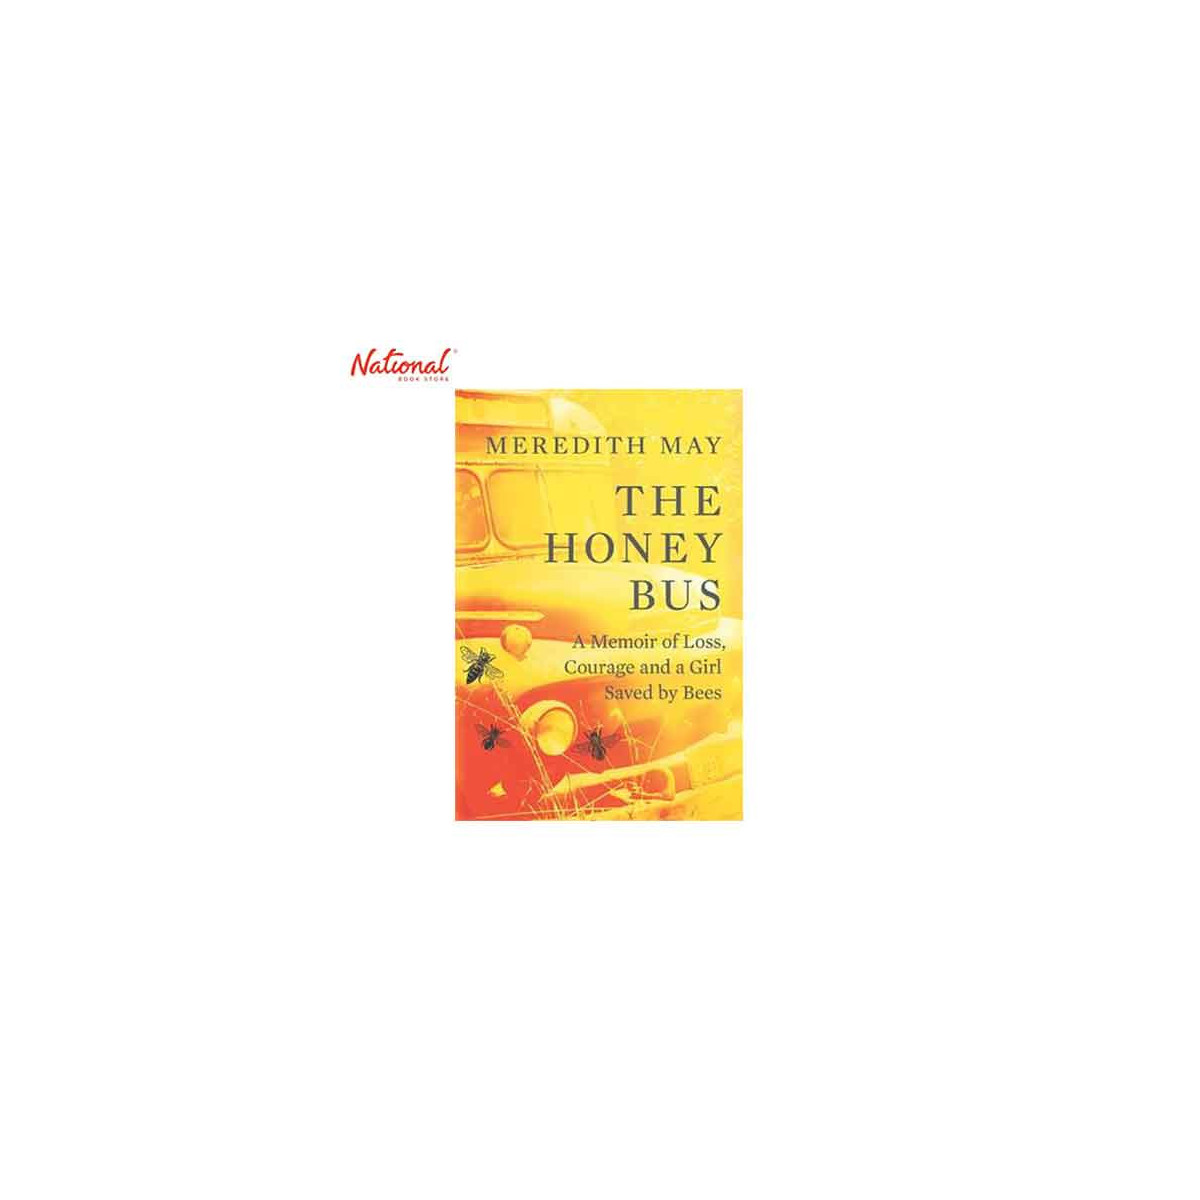 HONEY BUS: A MEMOIR OF LOSS, COURAGE AND A GIRL SAVED BY BEES TRADE PAPERBACK